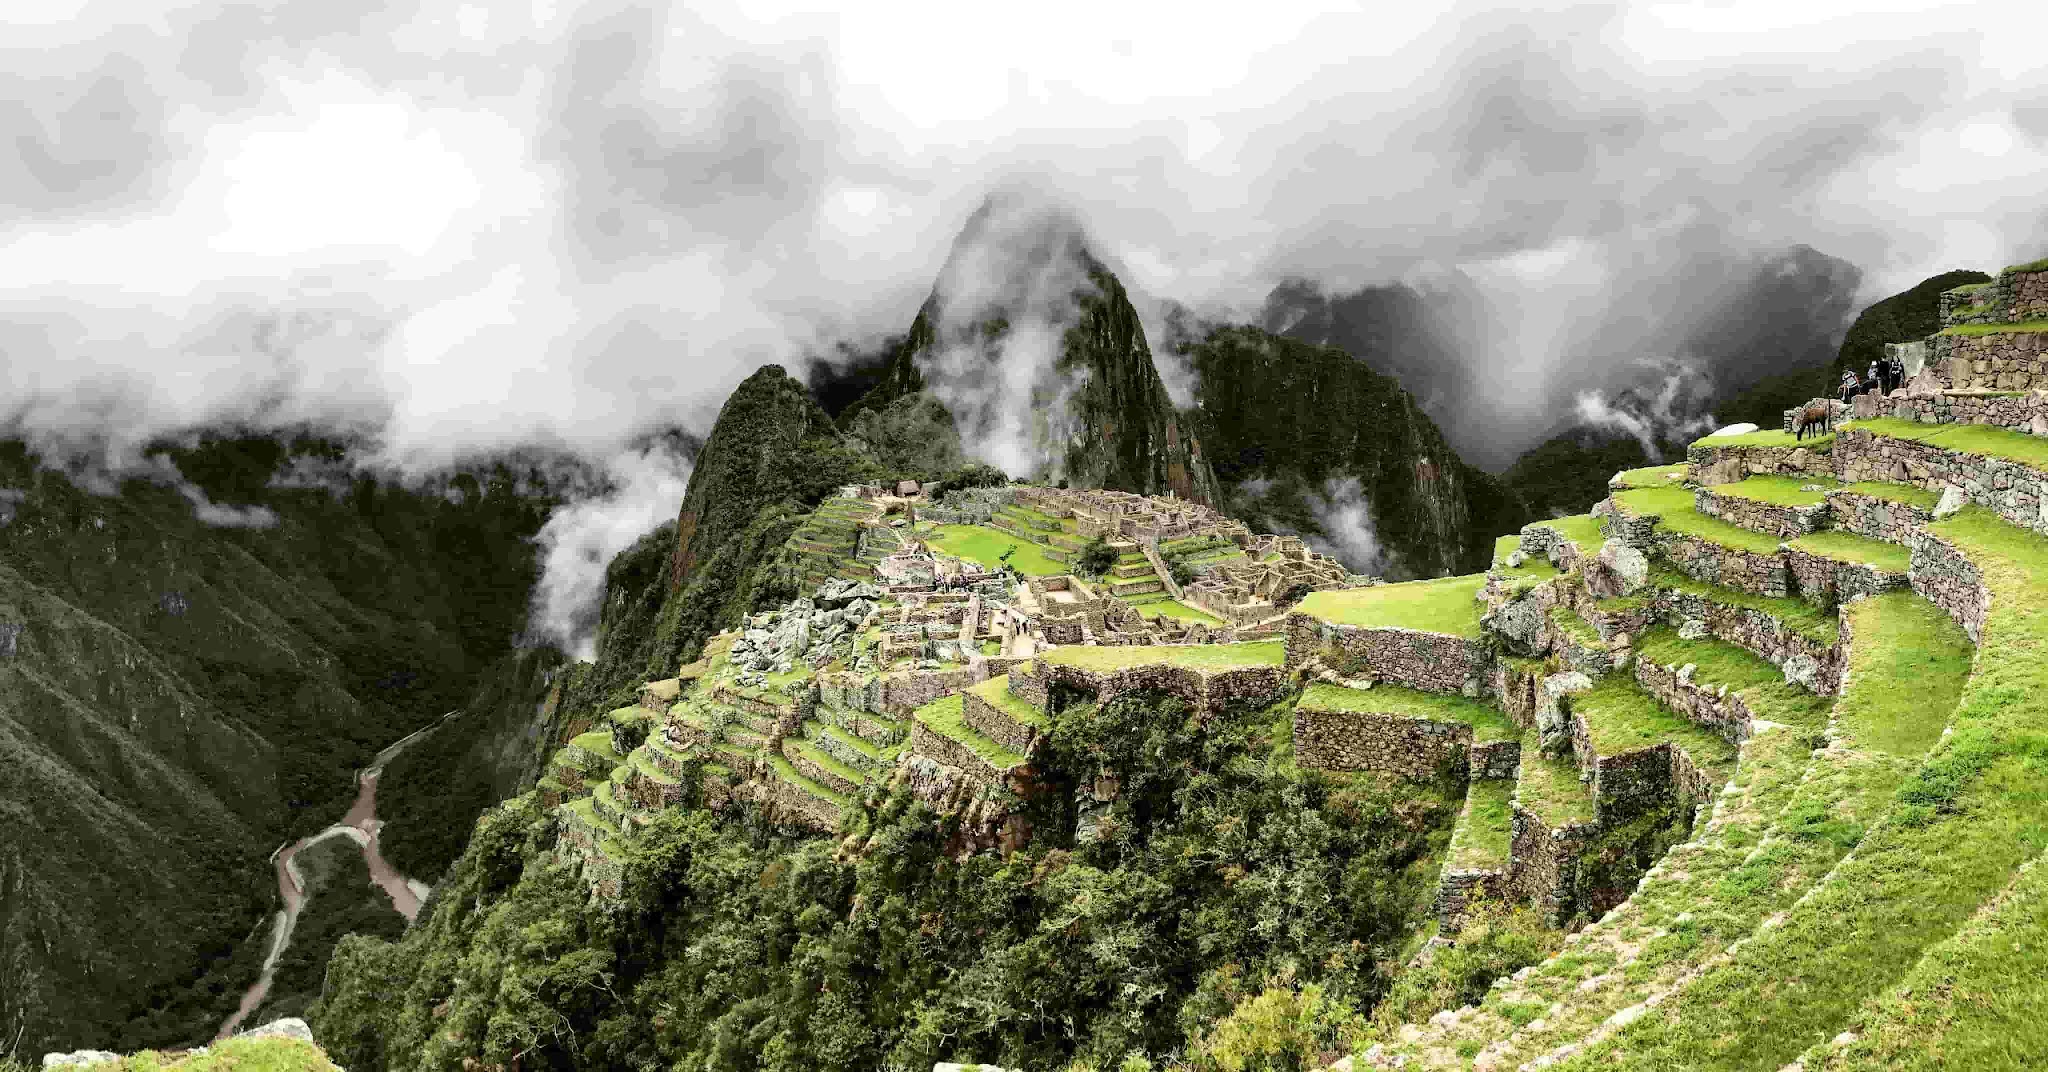 The Incan Civilization: A Well-established And Flourishing Society